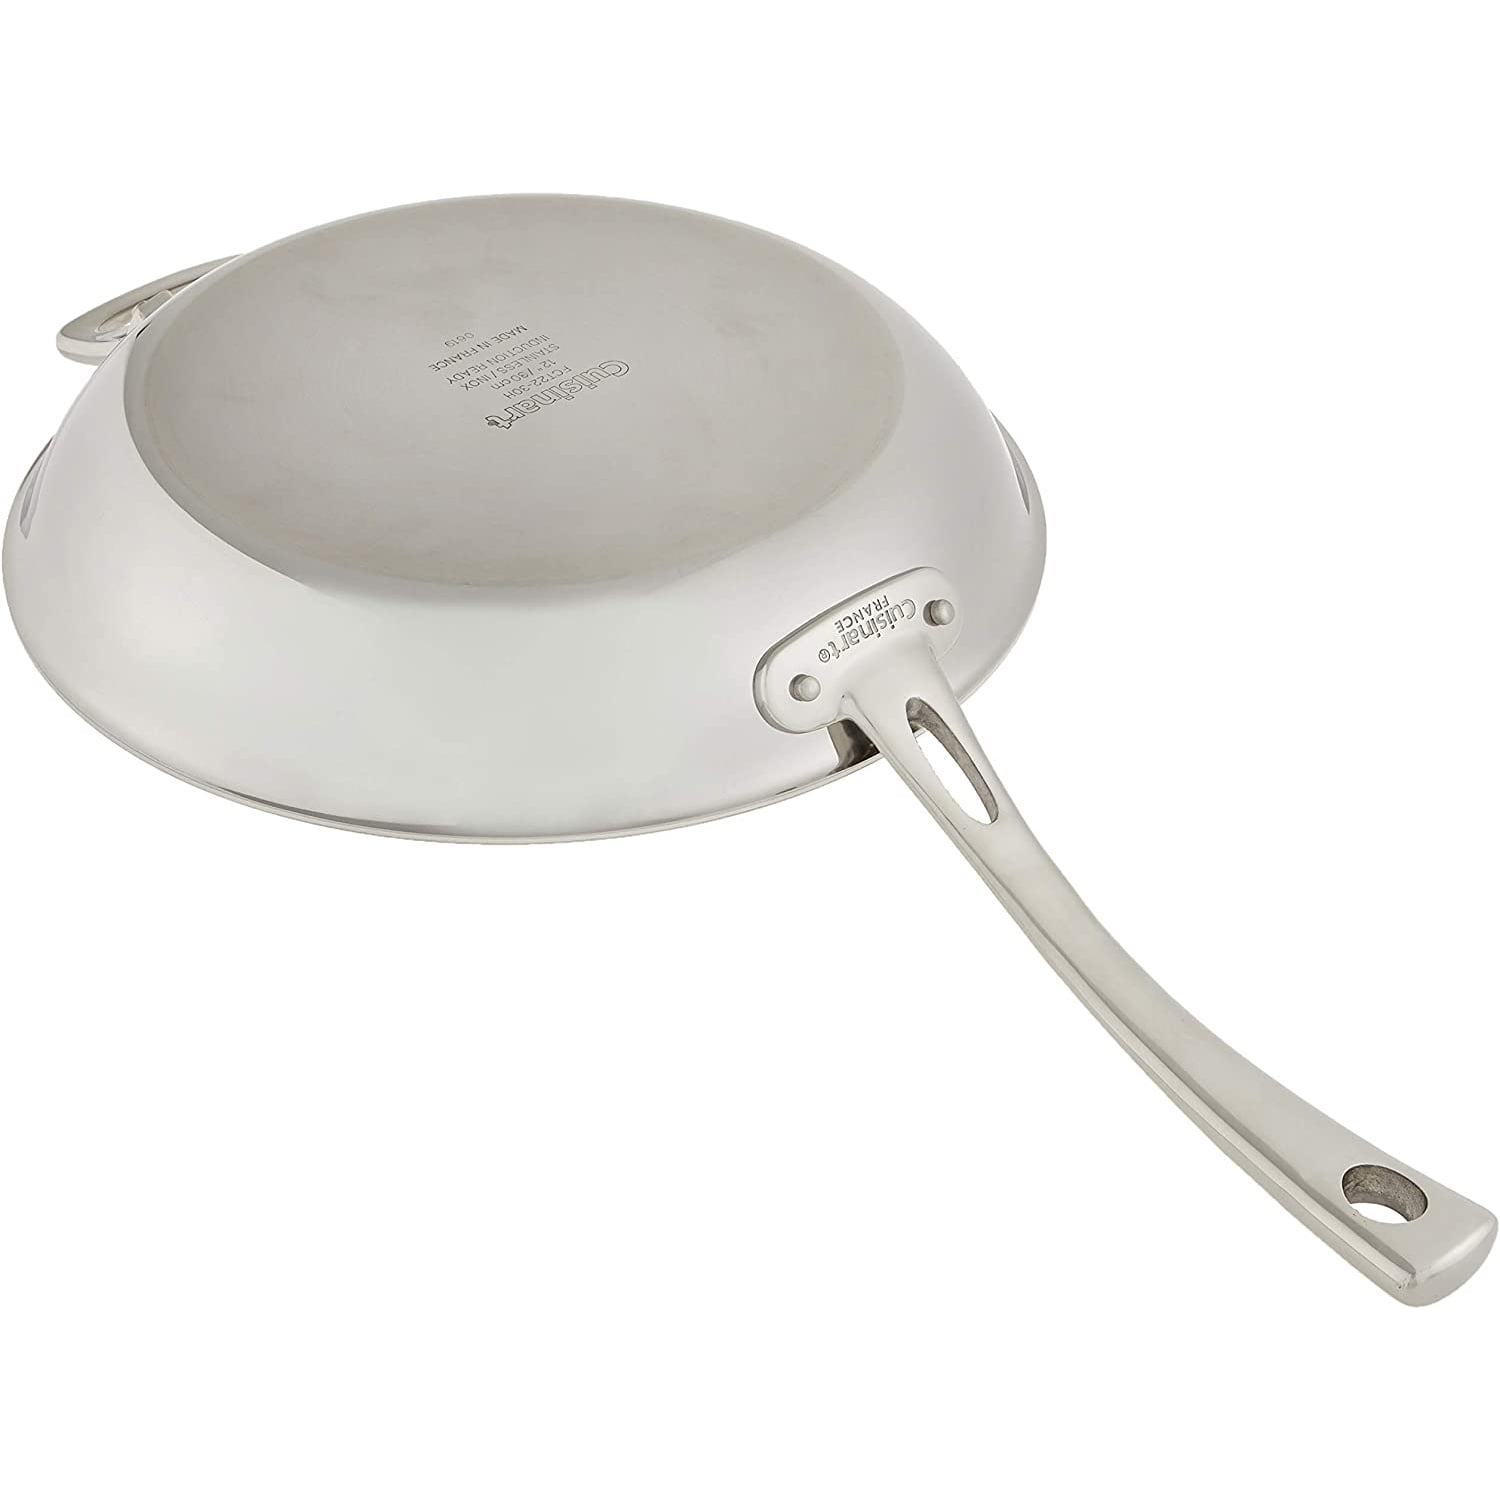 Cuisinart 12inch Tri-Ply French Classic Stainless Non-Stick Frying Pan